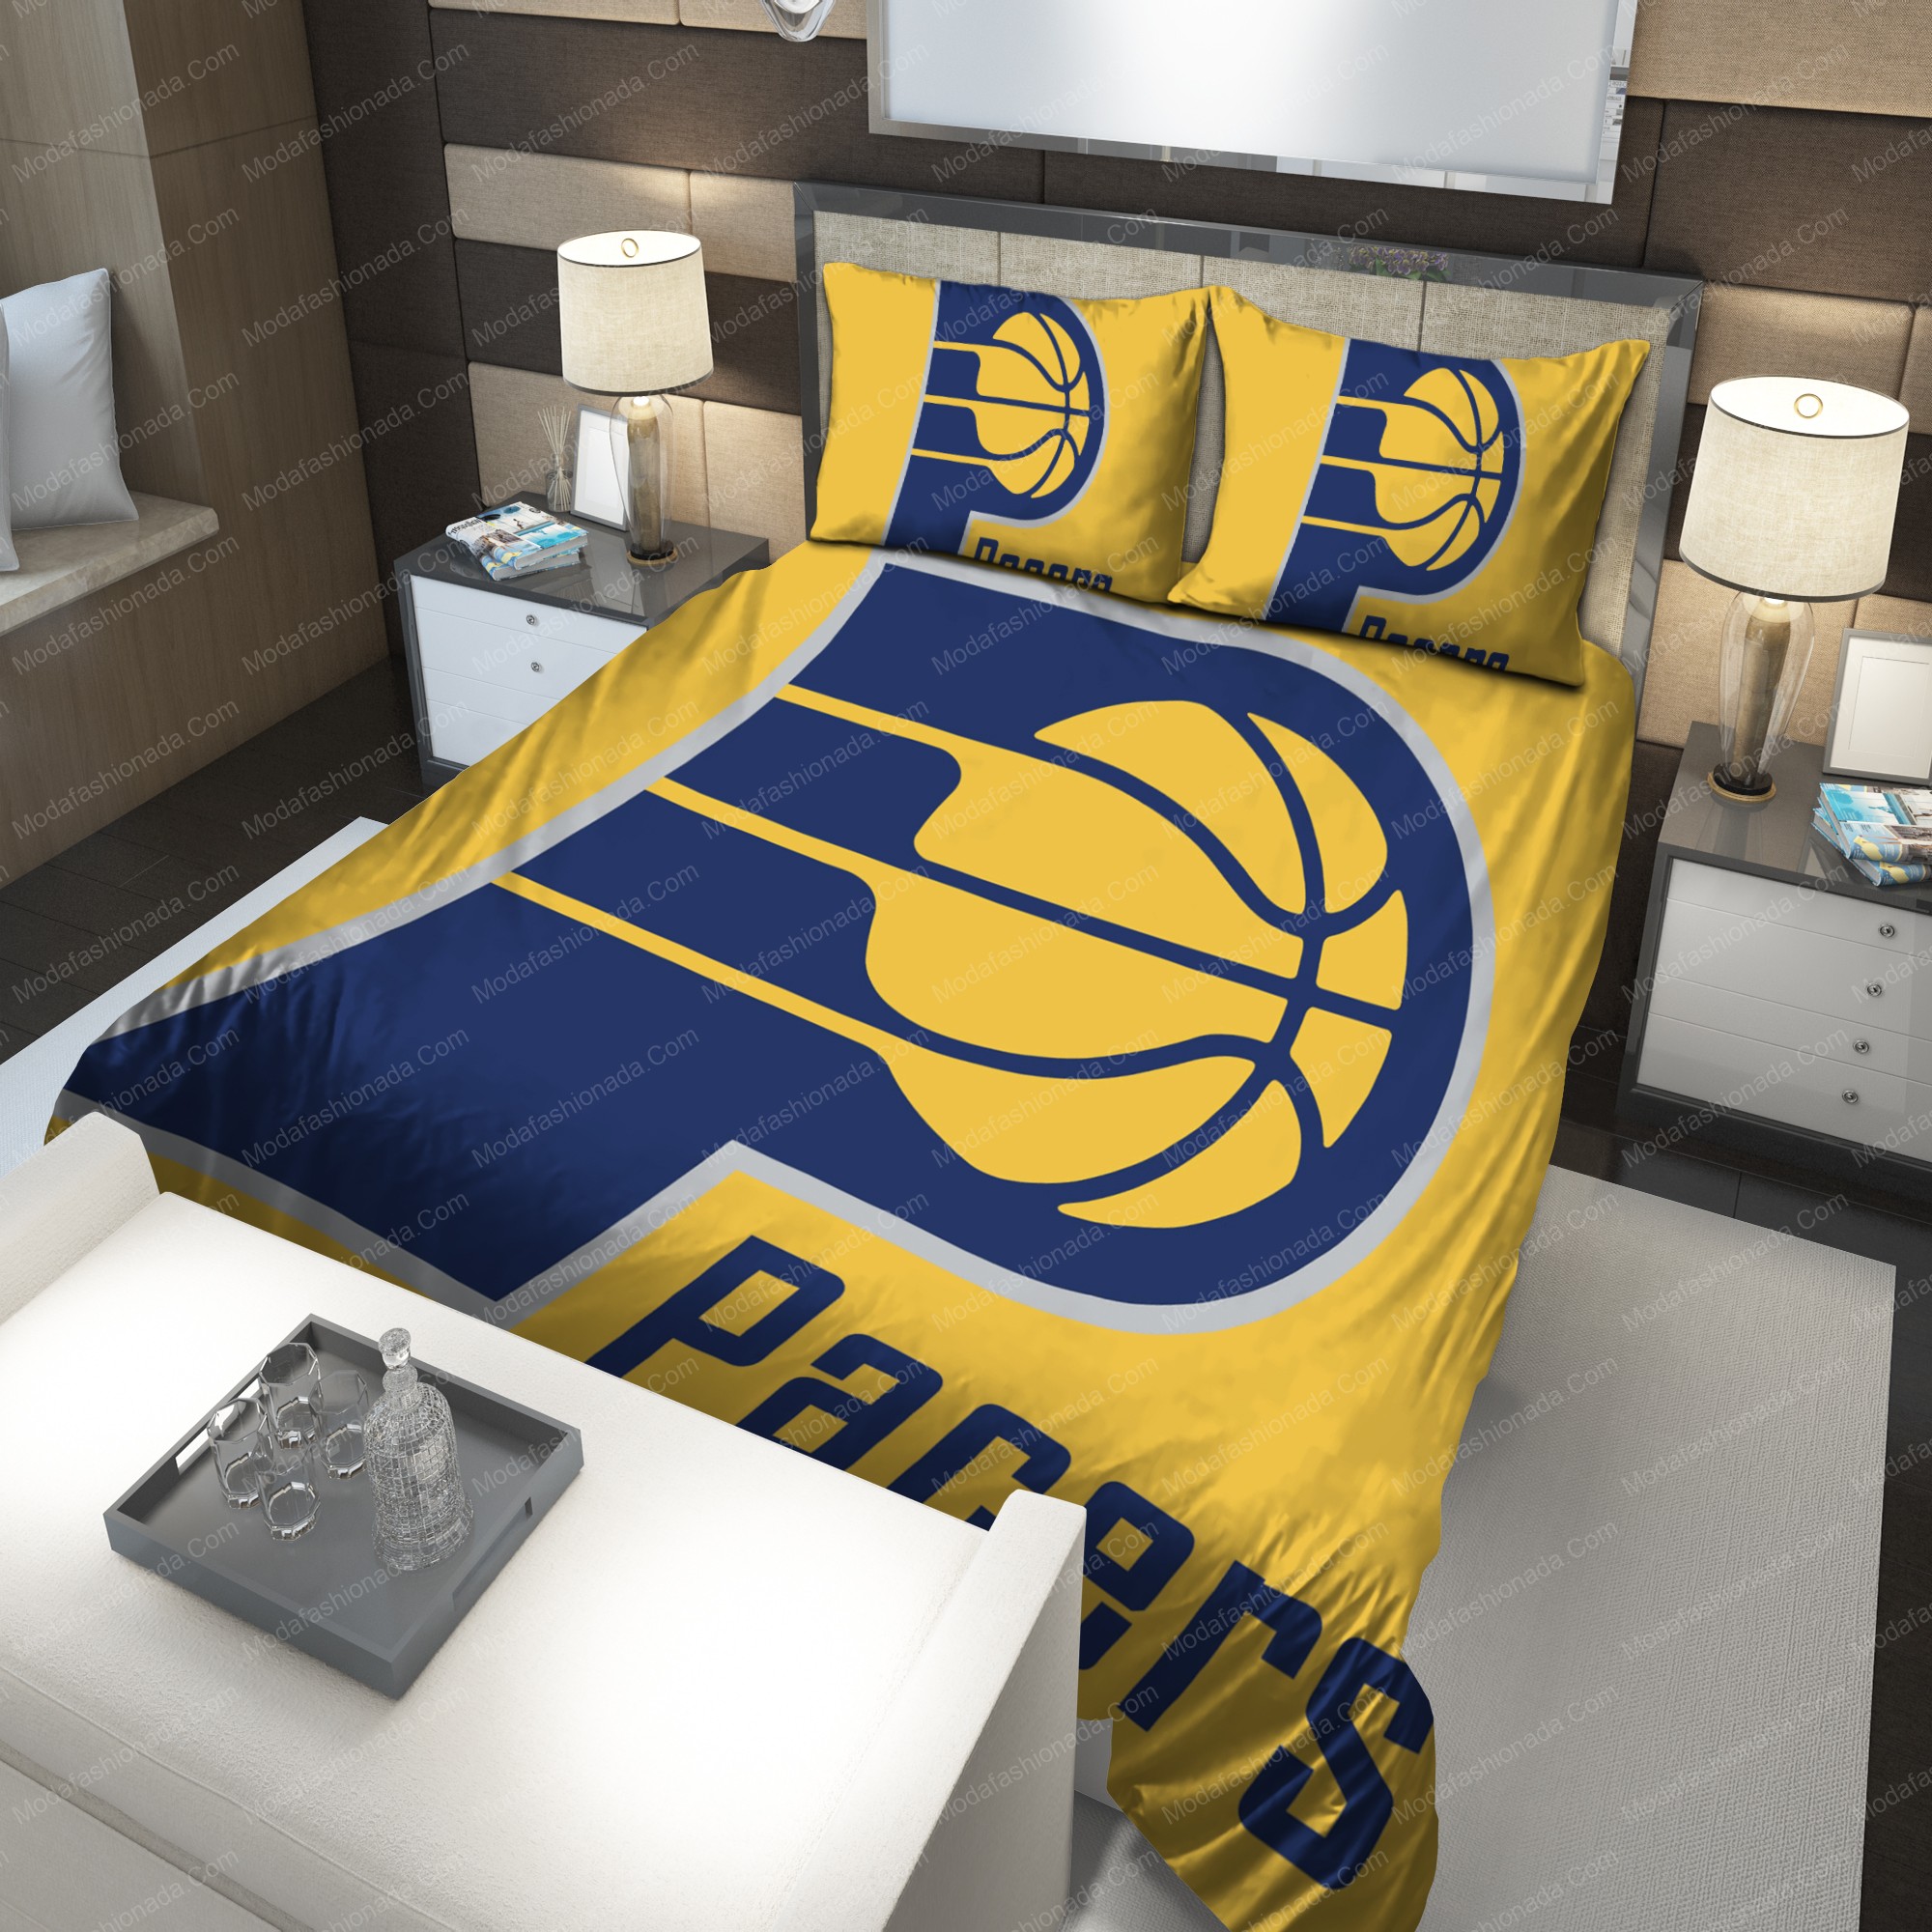 2005-2017 Indiana Pacers Nba 234 Logo Type 1020 Bedding Sets Sporty Bedroom Home Decor